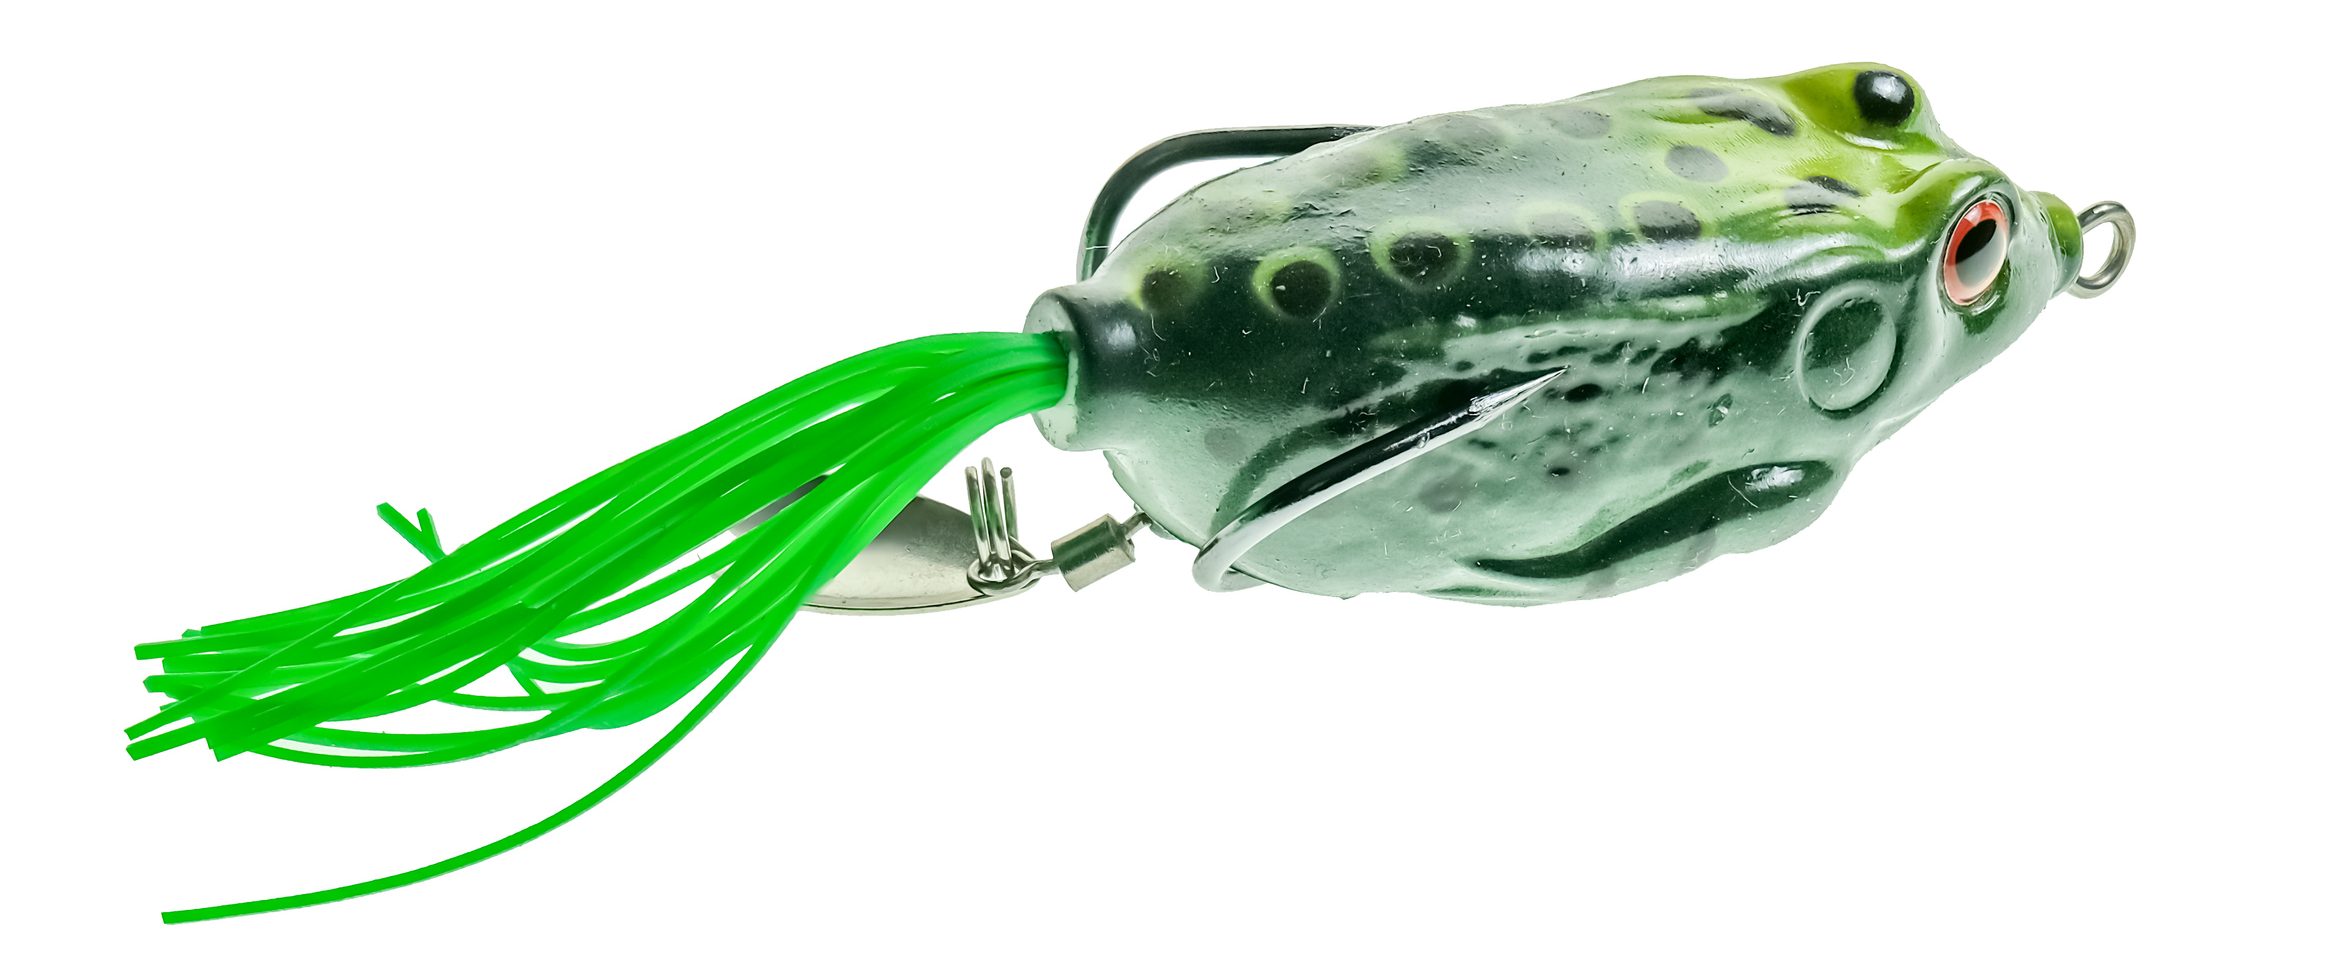 Close up of a surface frog fishing lure used to catch pike and bass isolated on a plain white background